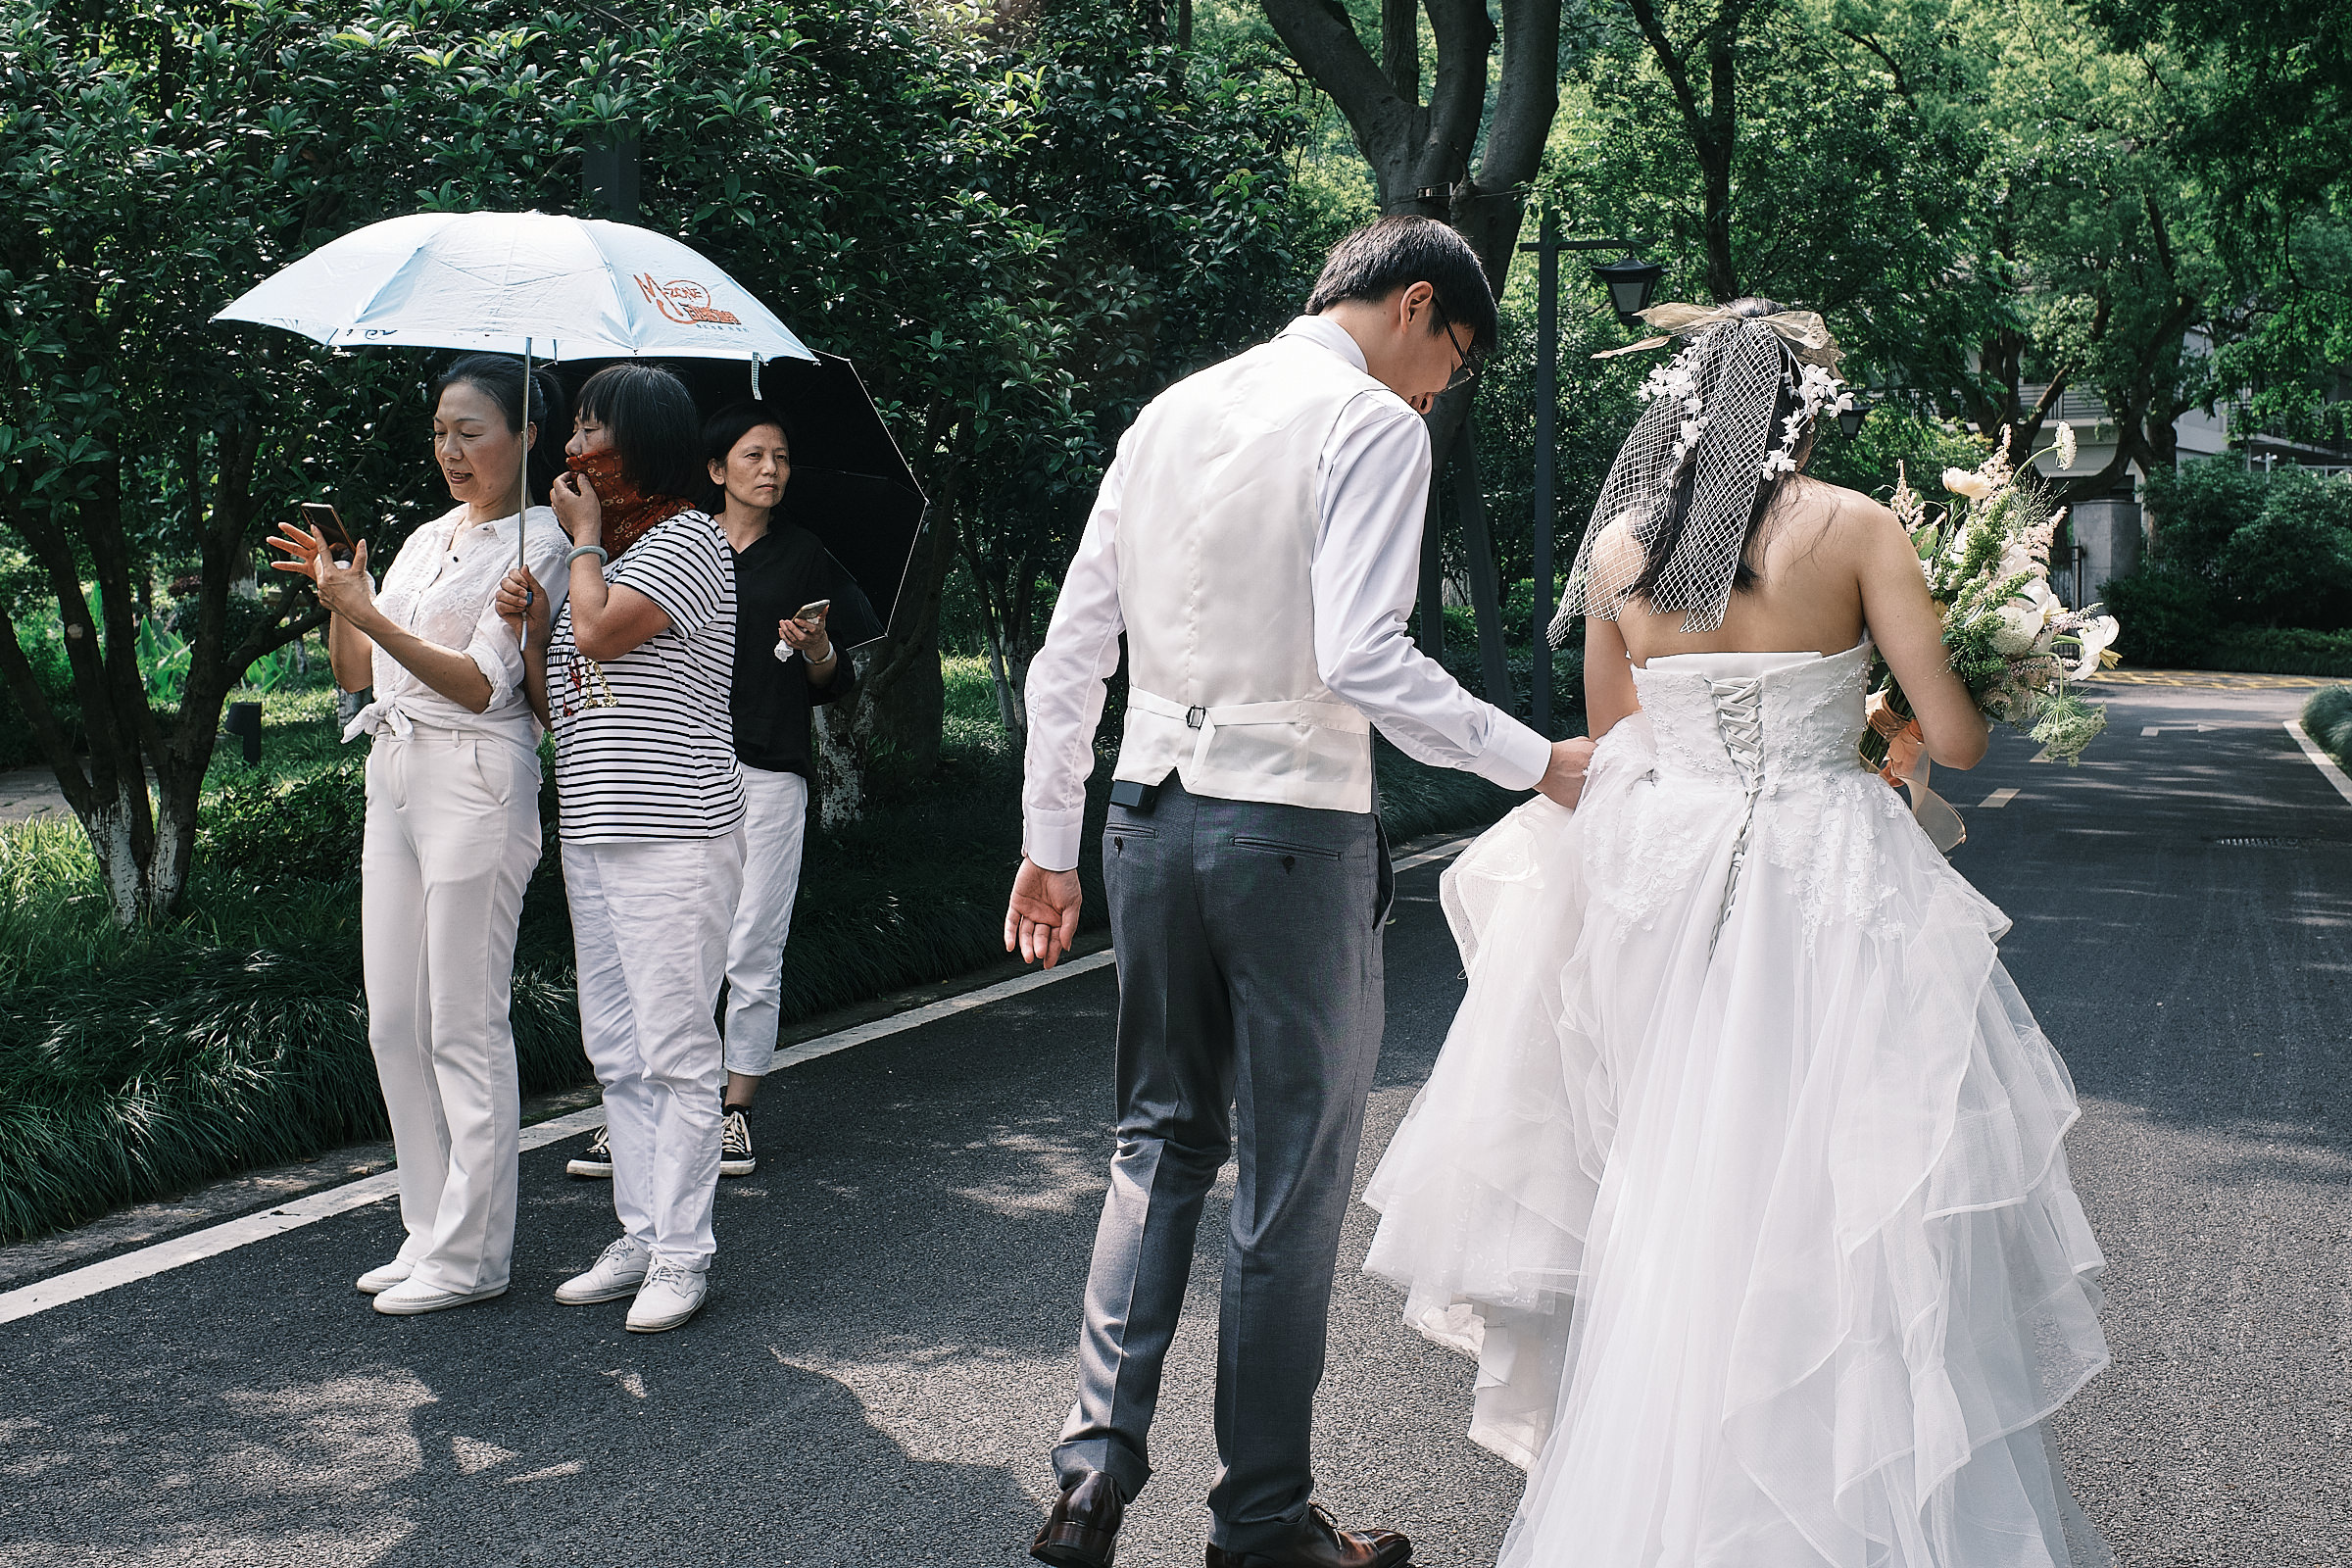 groom holds the bride and her dress as they walk and strangers look at them in the park